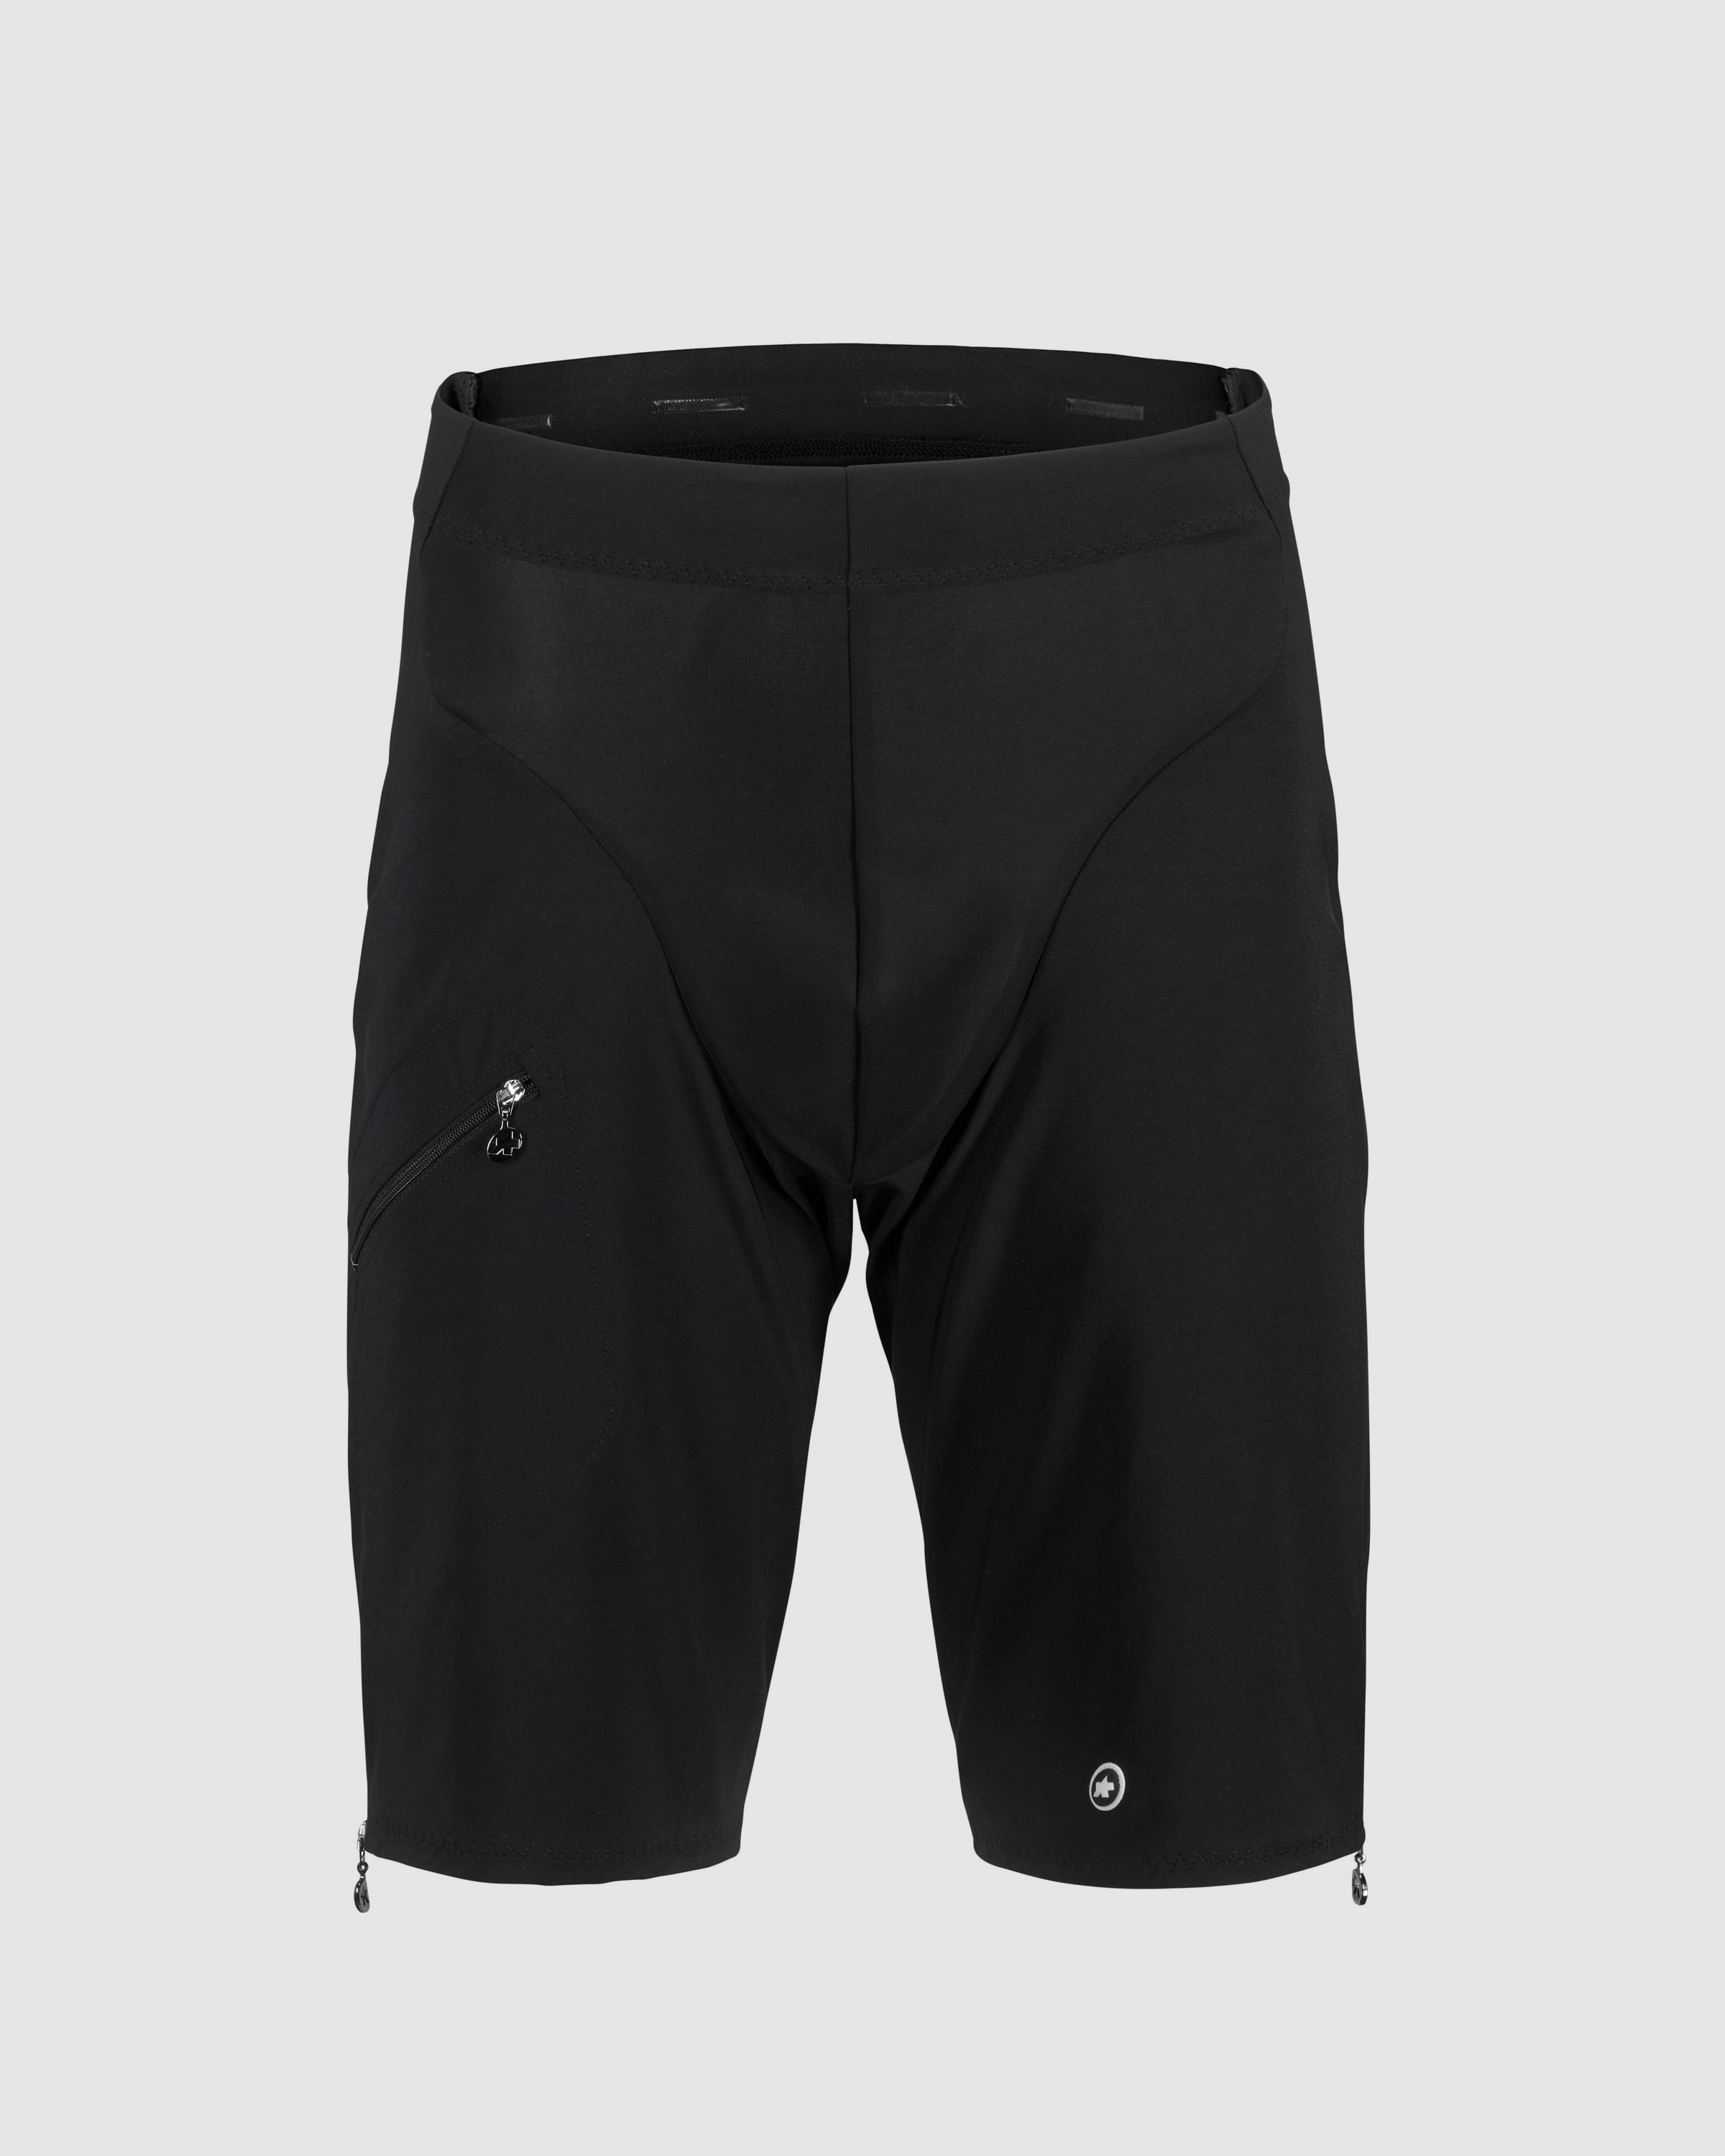 H.rallycargoShorts_s7 - ASSOS Of Switzerland - Official Outlet